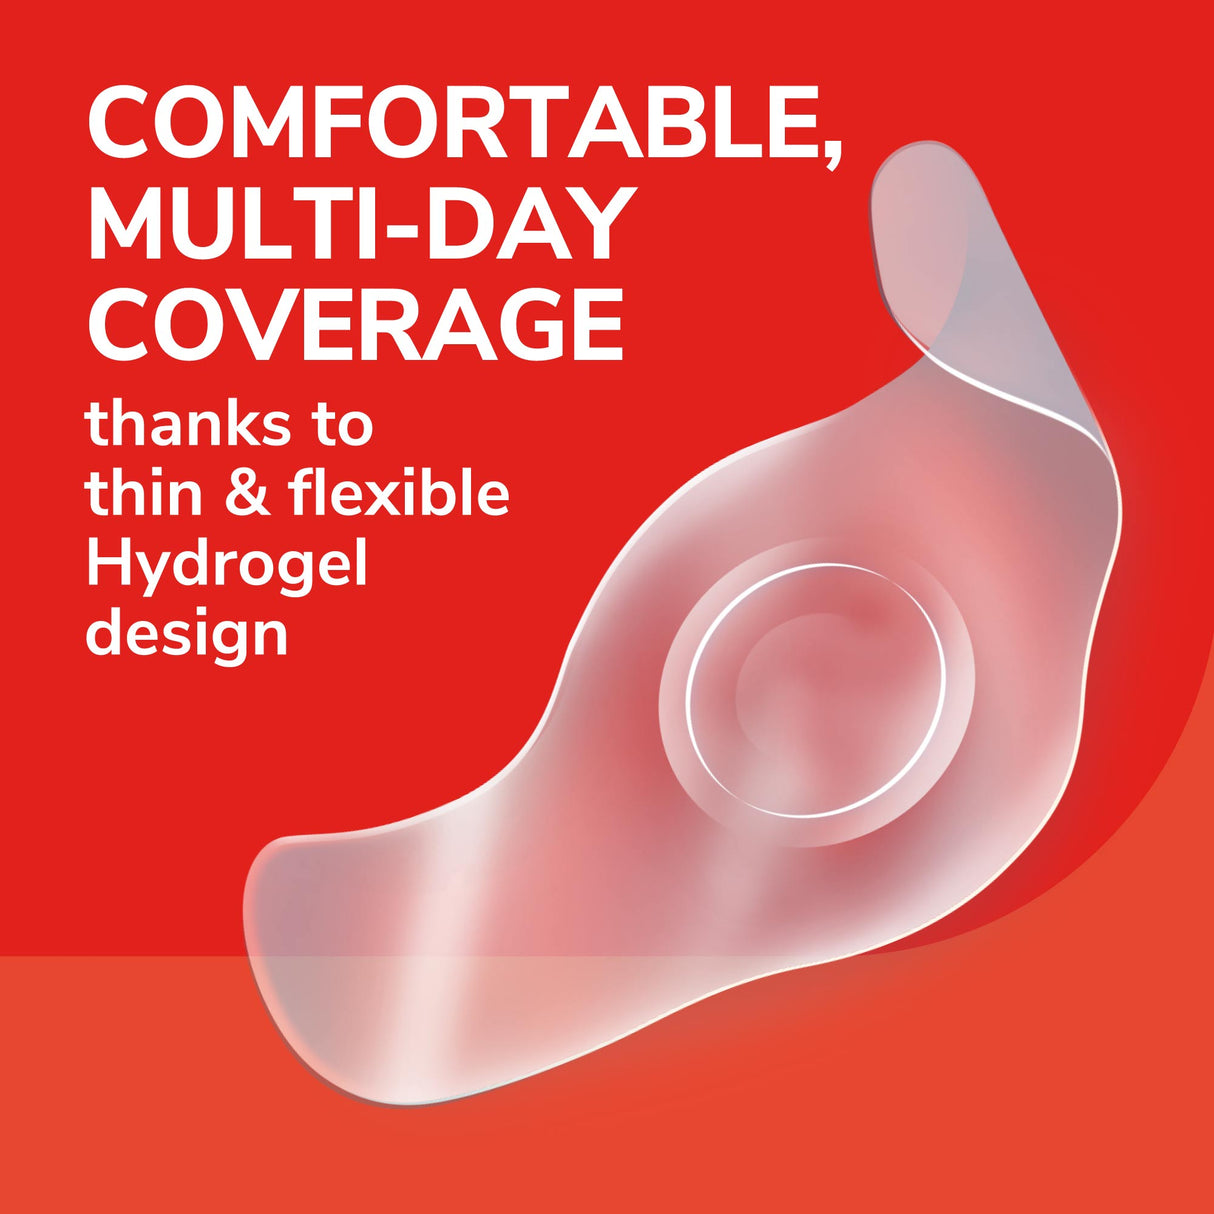 image of comfortable multi day coverage thanks to thin & flexible hydrogel design